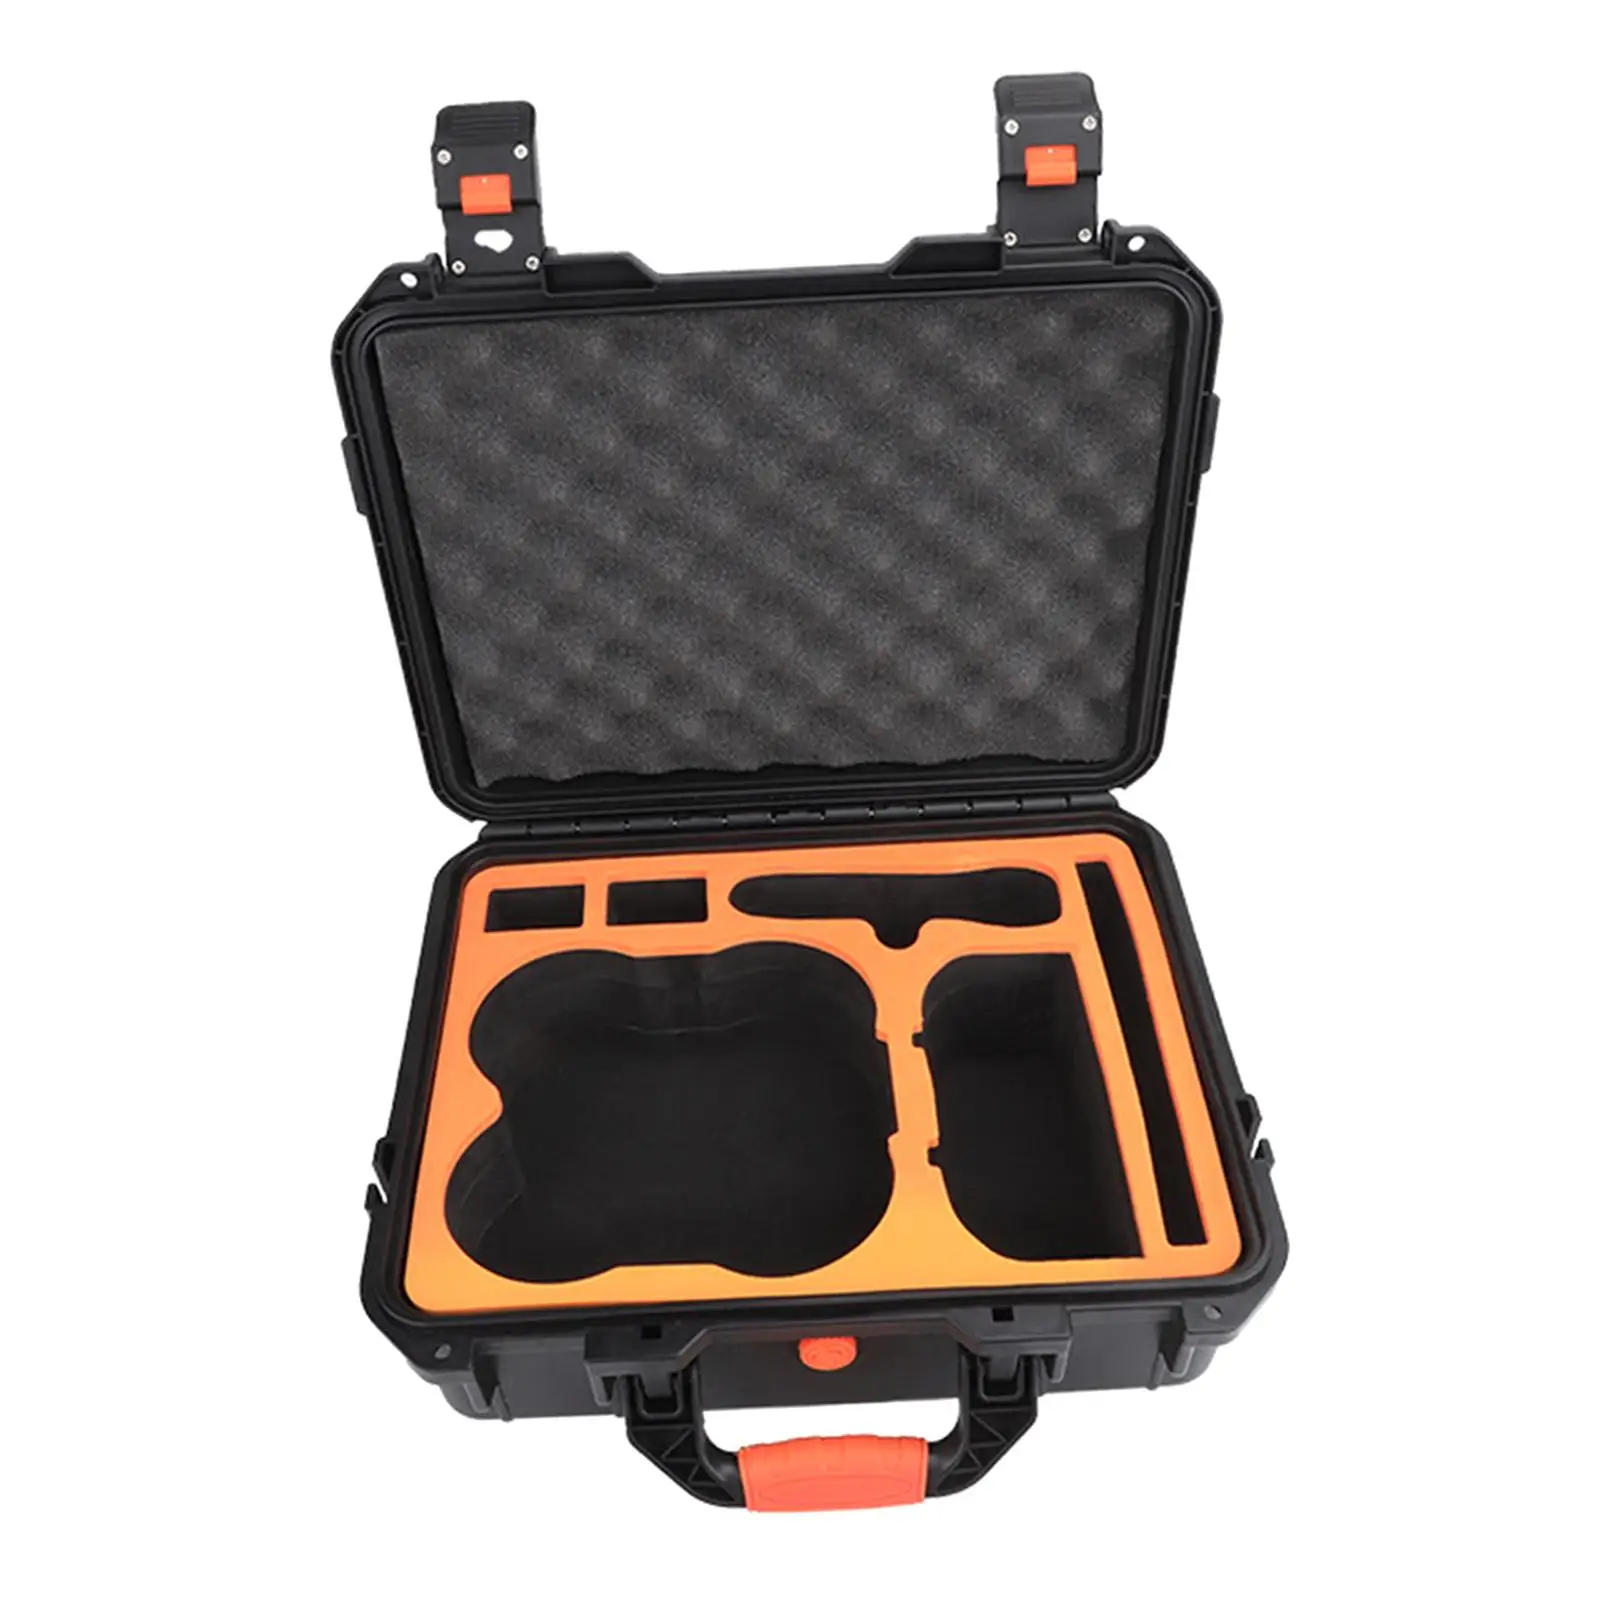 Portable Carrying Case Waterproof with Handle Professional Hard Protective Case for Goggles 2 Remote Controller Quadcopter Accs